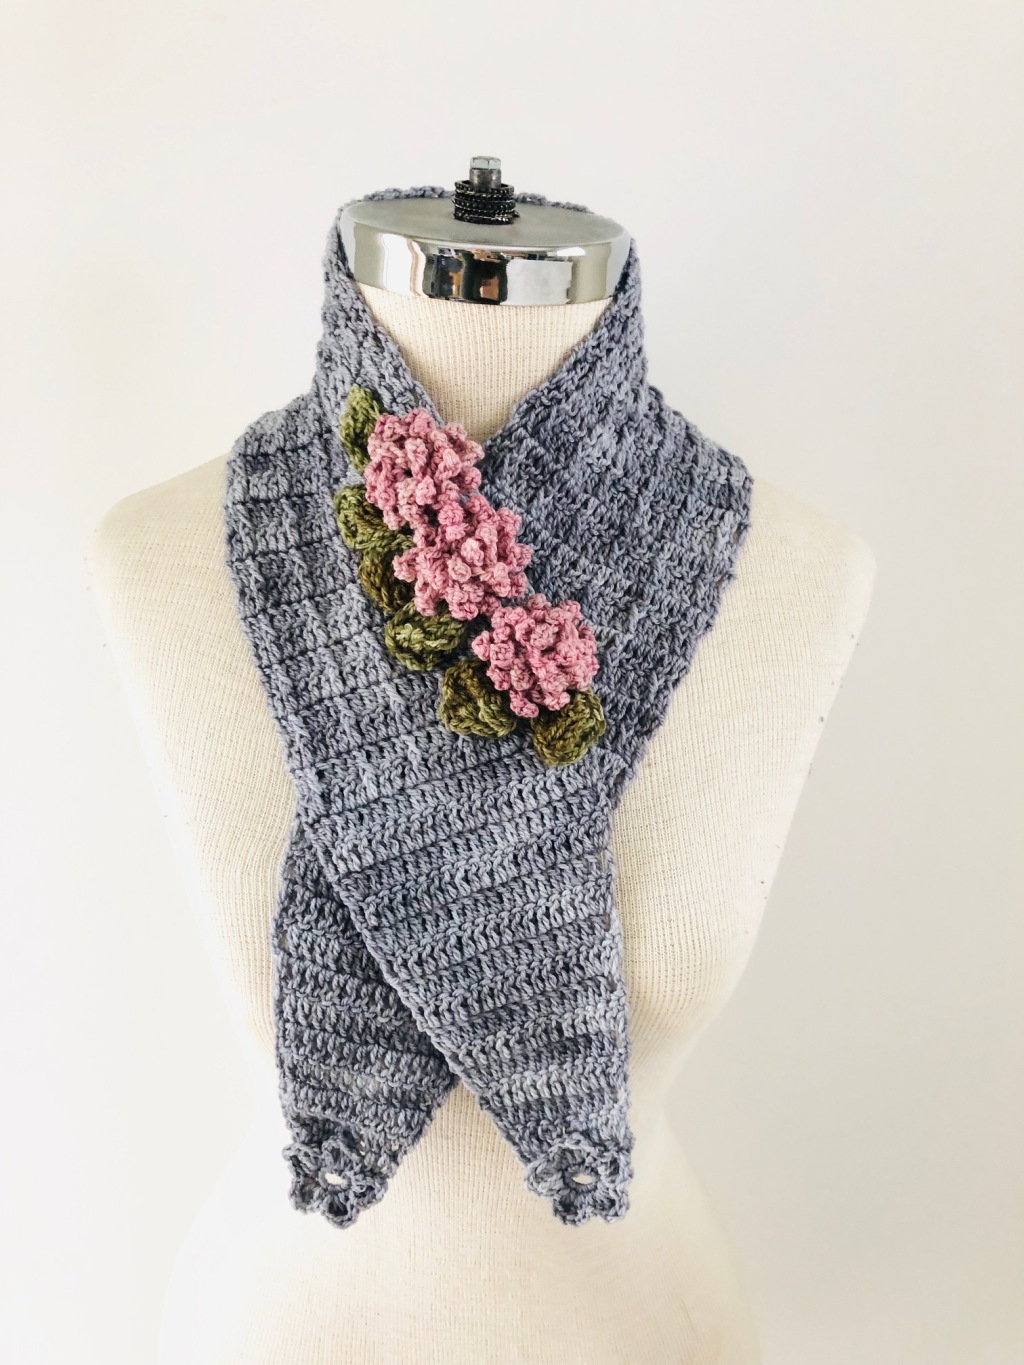 Floral Peony Scarf – Ready to wear!